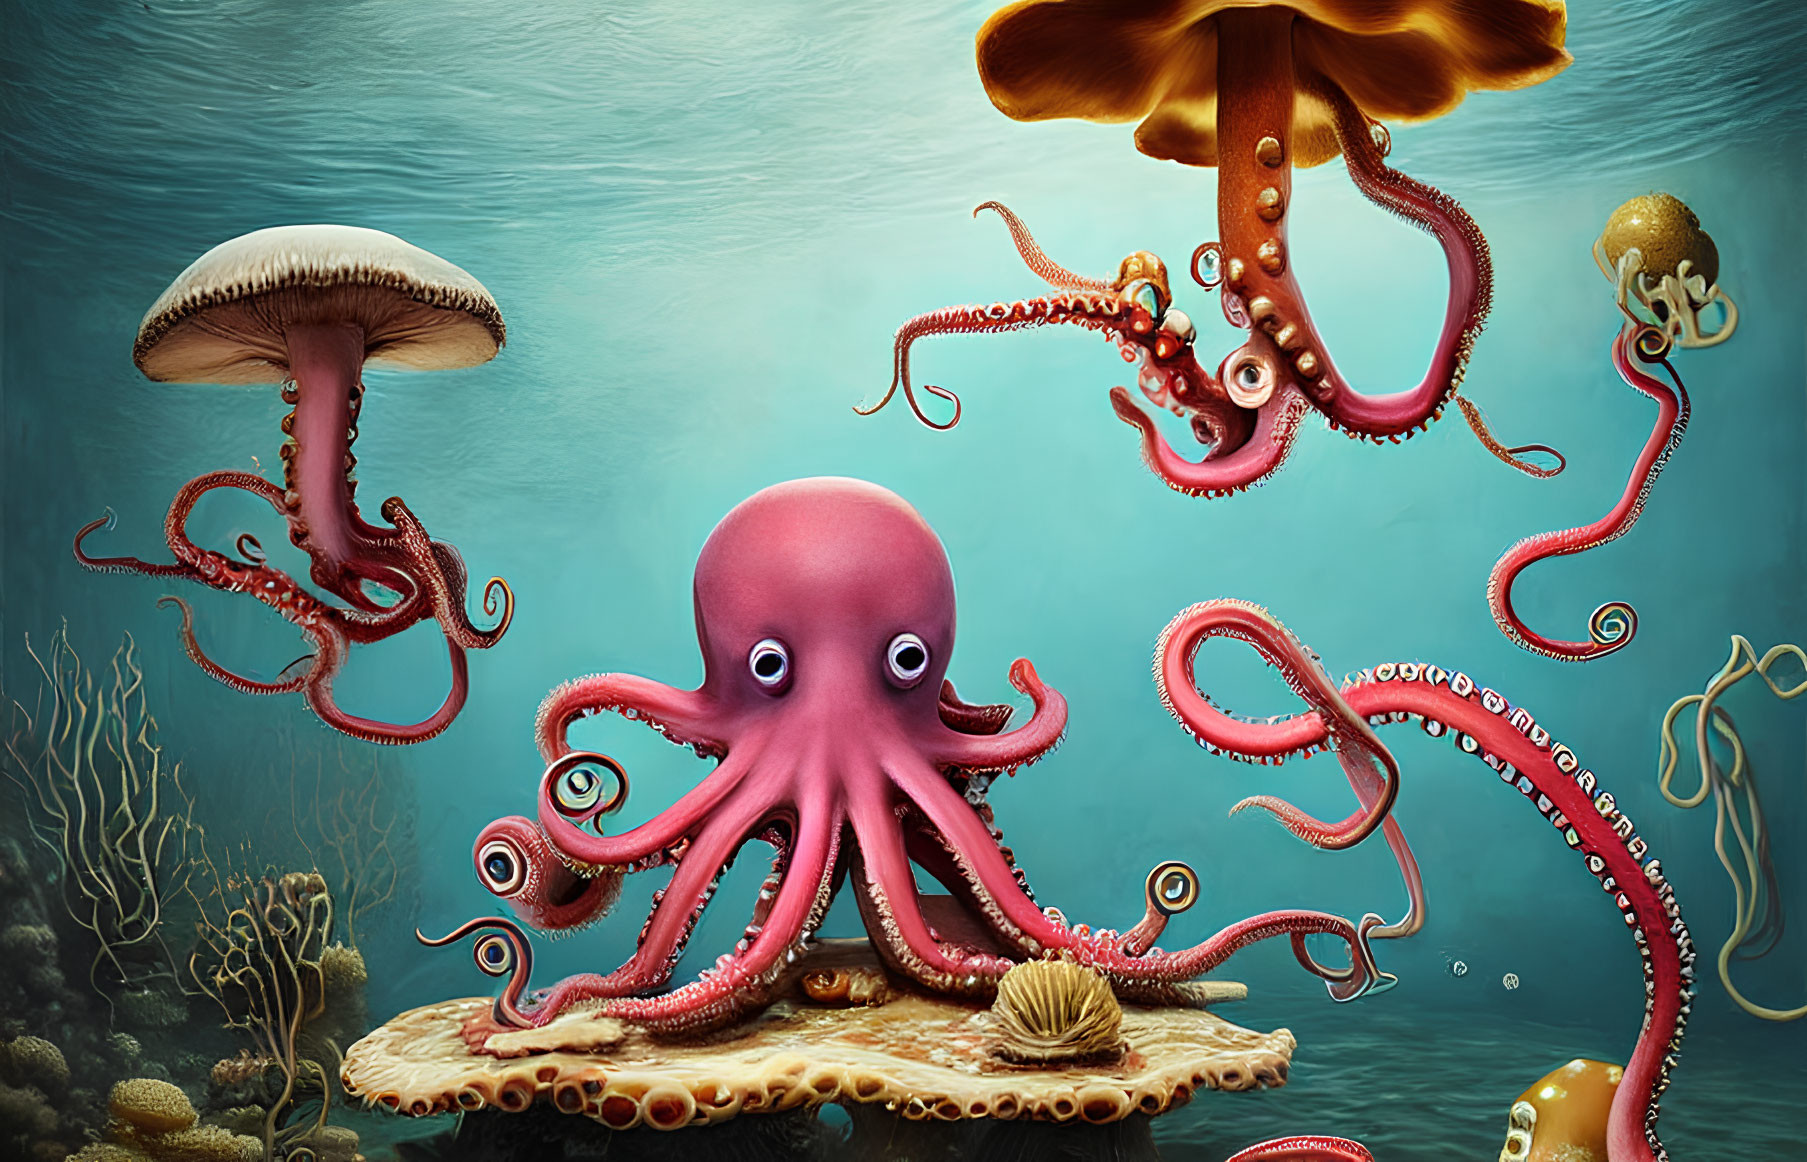 Colorful Cartoon Underwater Scene with Pink Octopus, Jellyfish, and Sea Plants